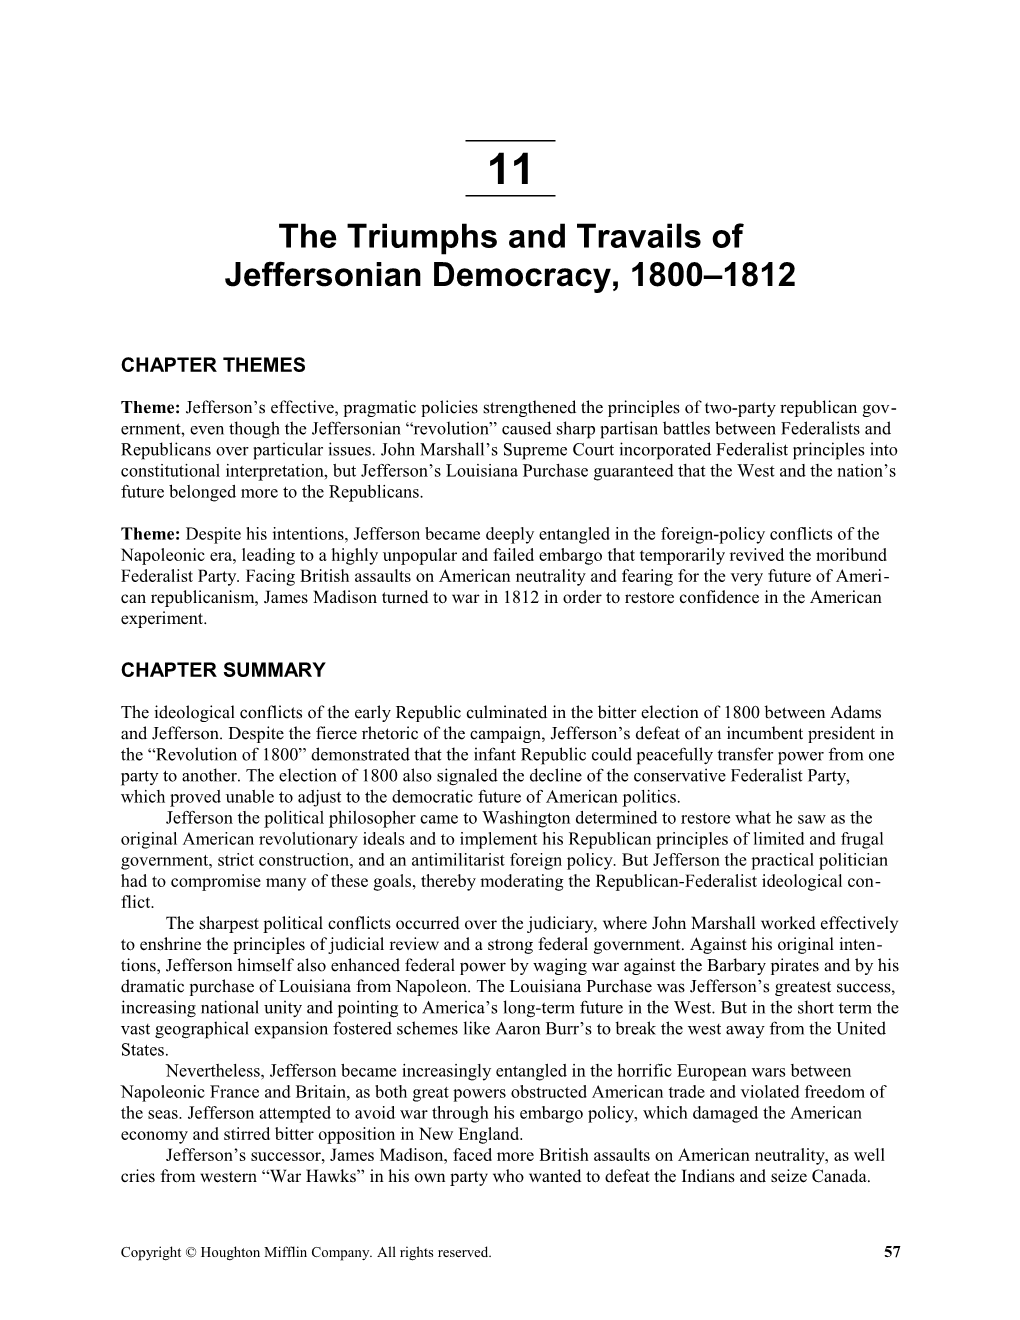 The Triumphs and Travails of Jeffersonian Democracy, 1800-1812